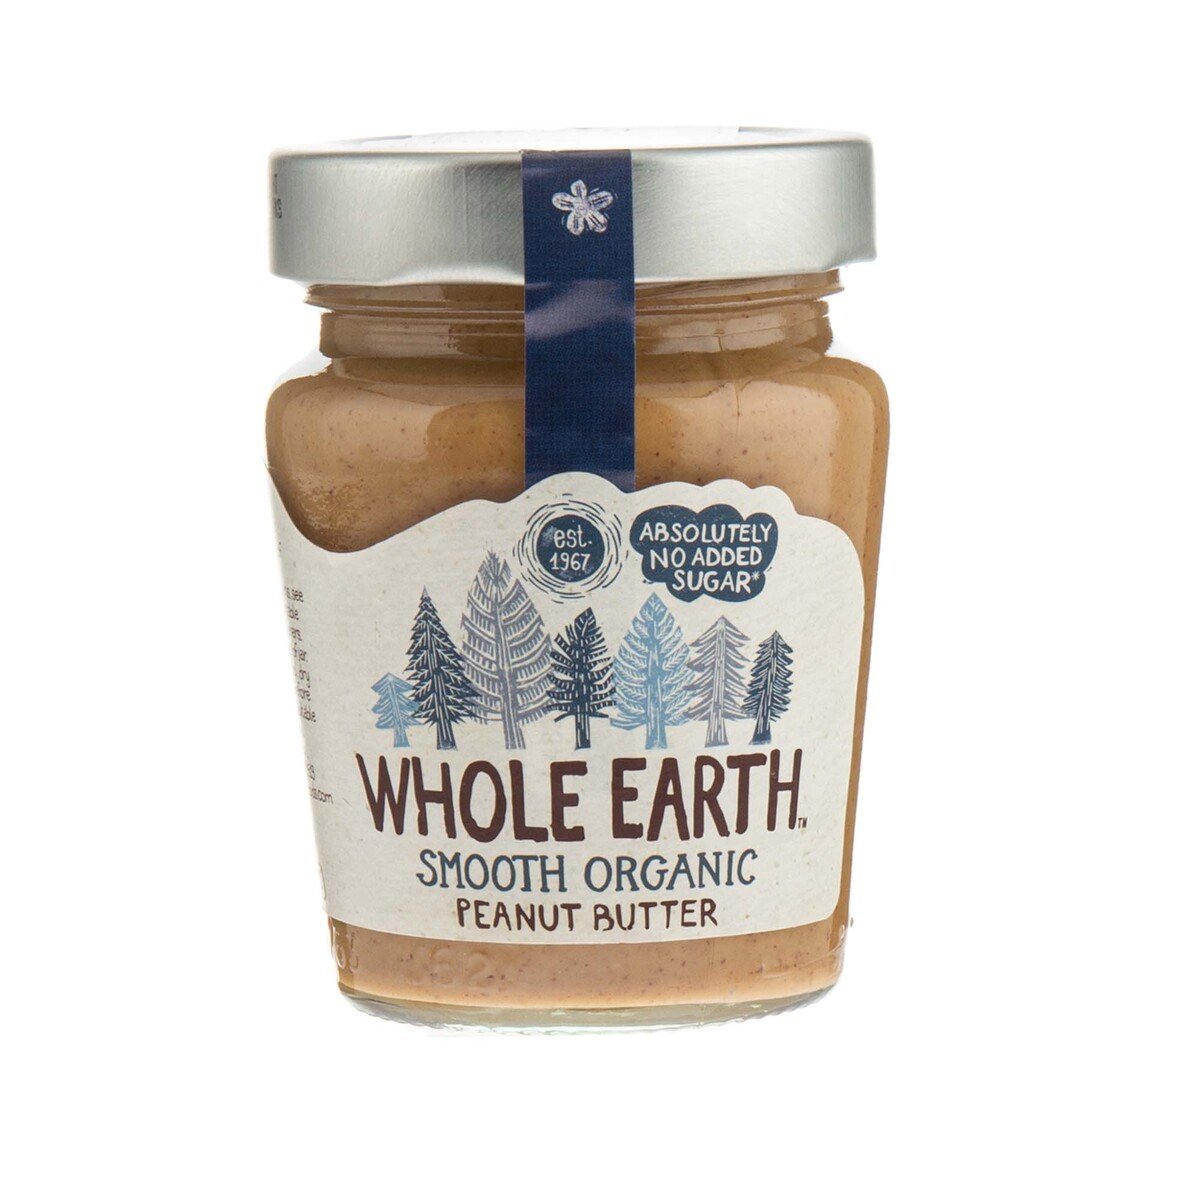 Whole Earth Smooth Organic Peanut Butter 227 g